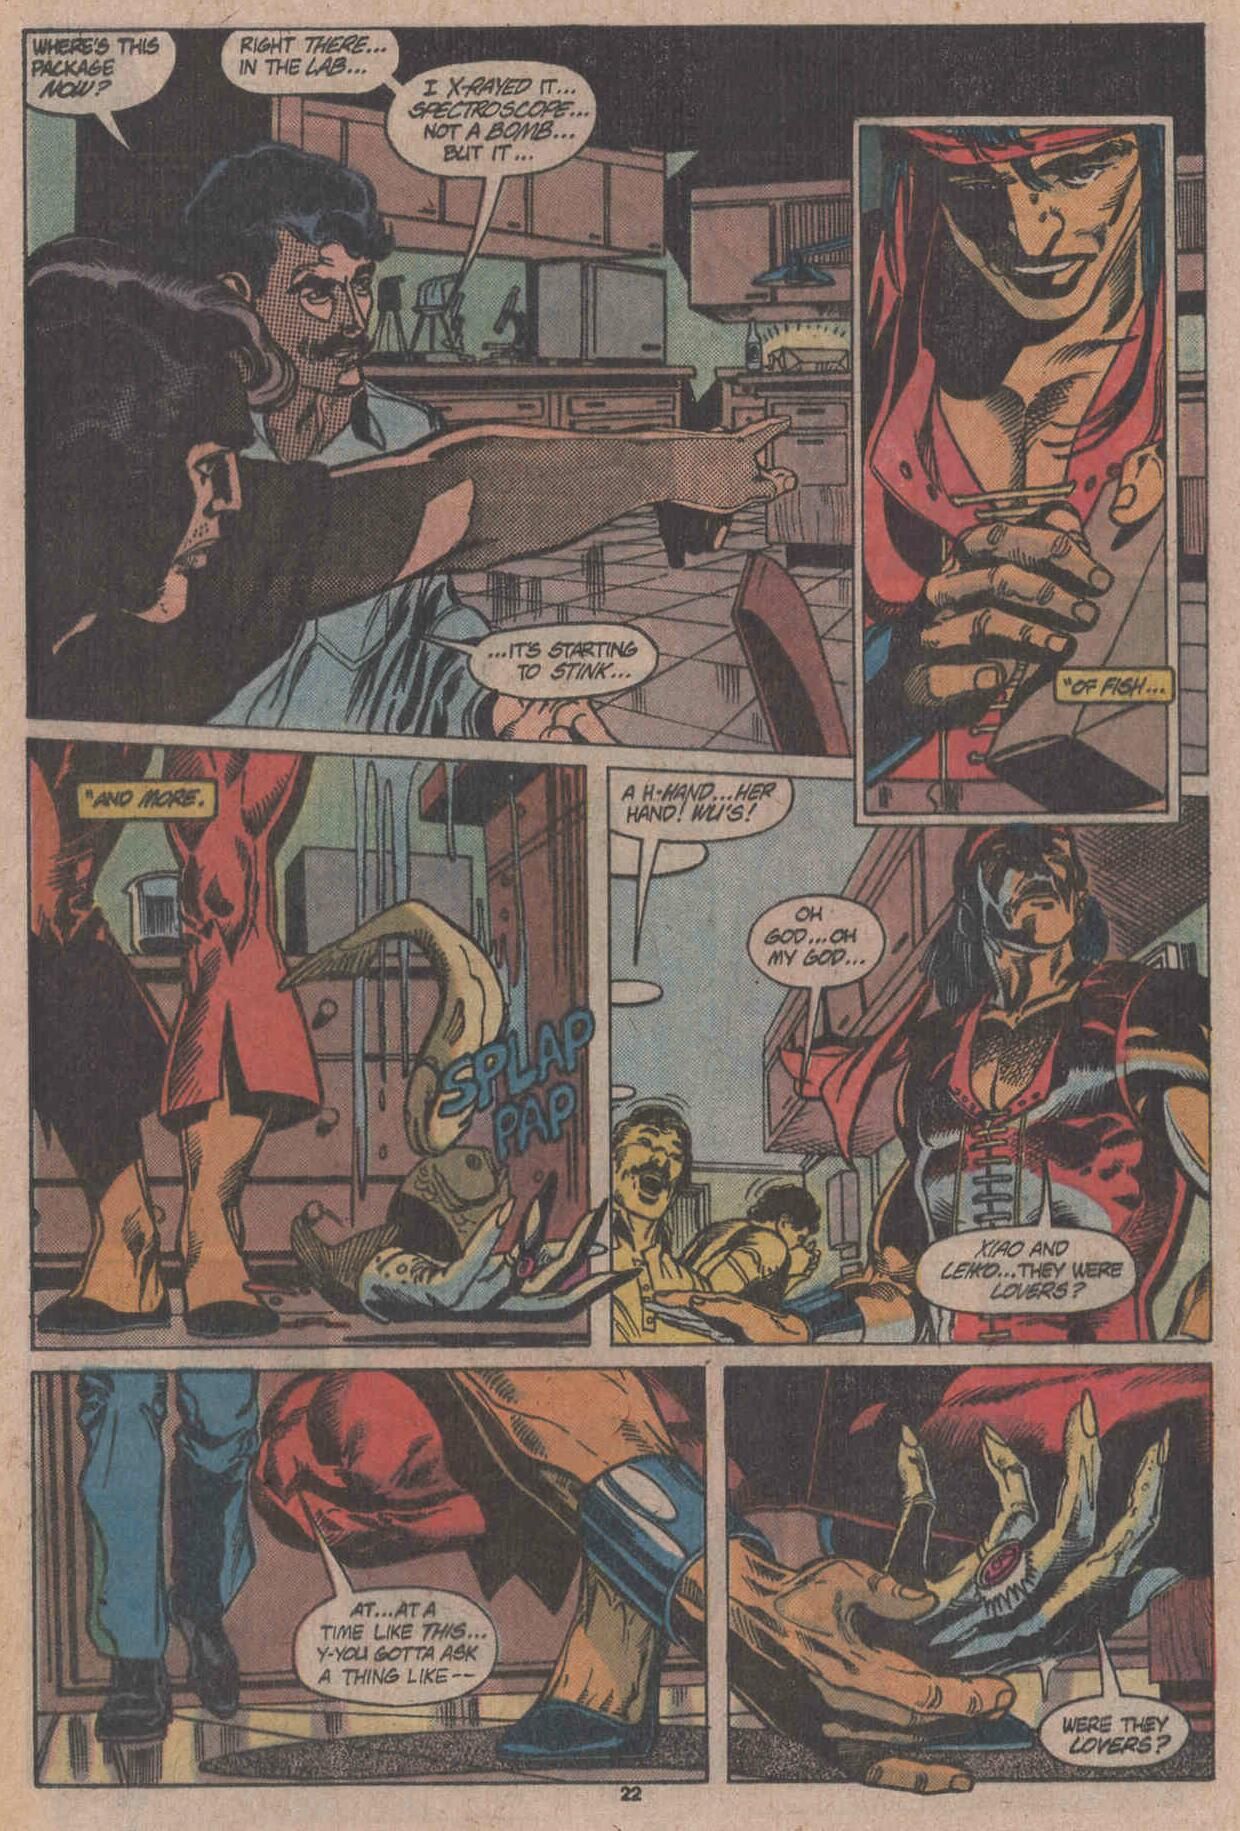 Leiko&#039;s hand was chopped off, enraging Shang-Chi. 